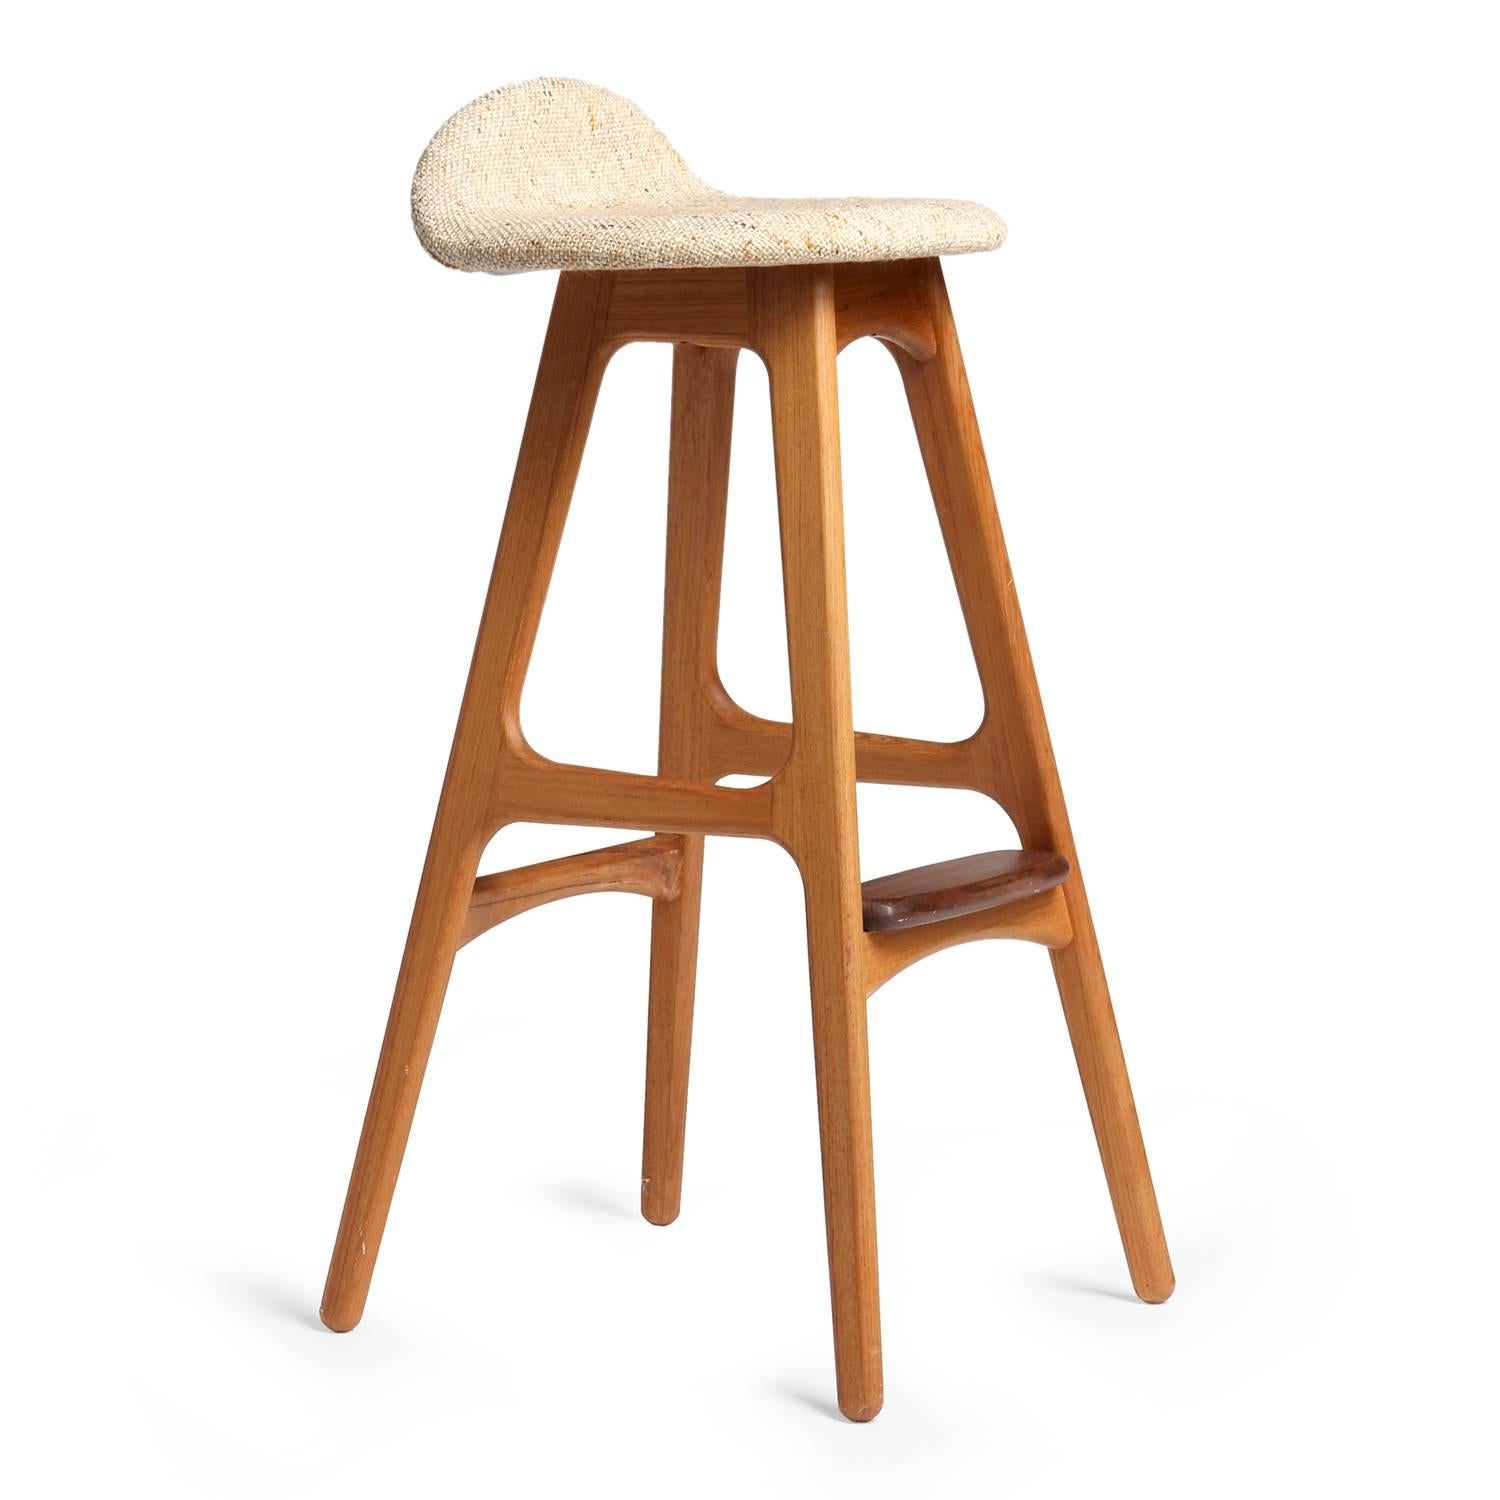 A sculptural and comfortable barstool having splayed legs, a shaped seat with an upturned back support and a rounded projecting foot rest.